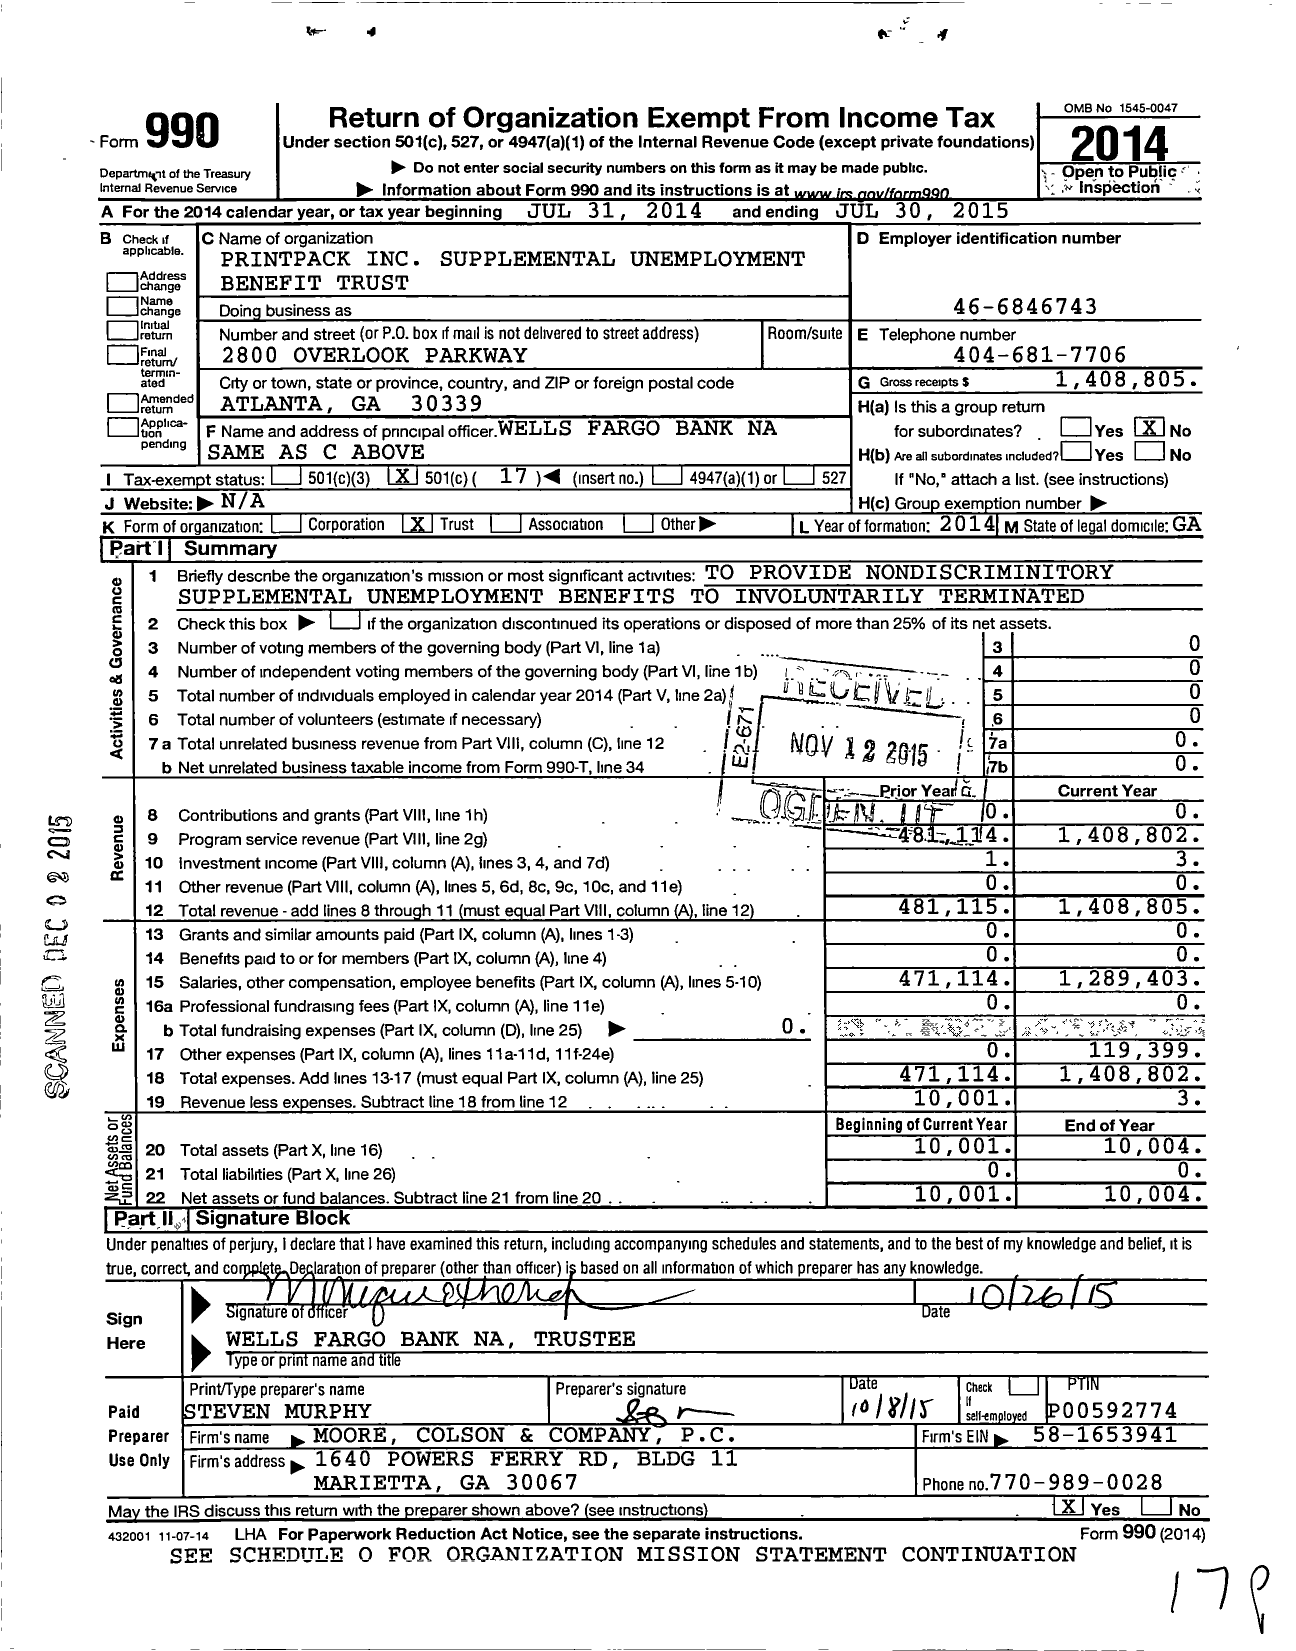 Image of first page of 2014 Form 990O for Printpack Supplemental Unemployment Benefit Trust